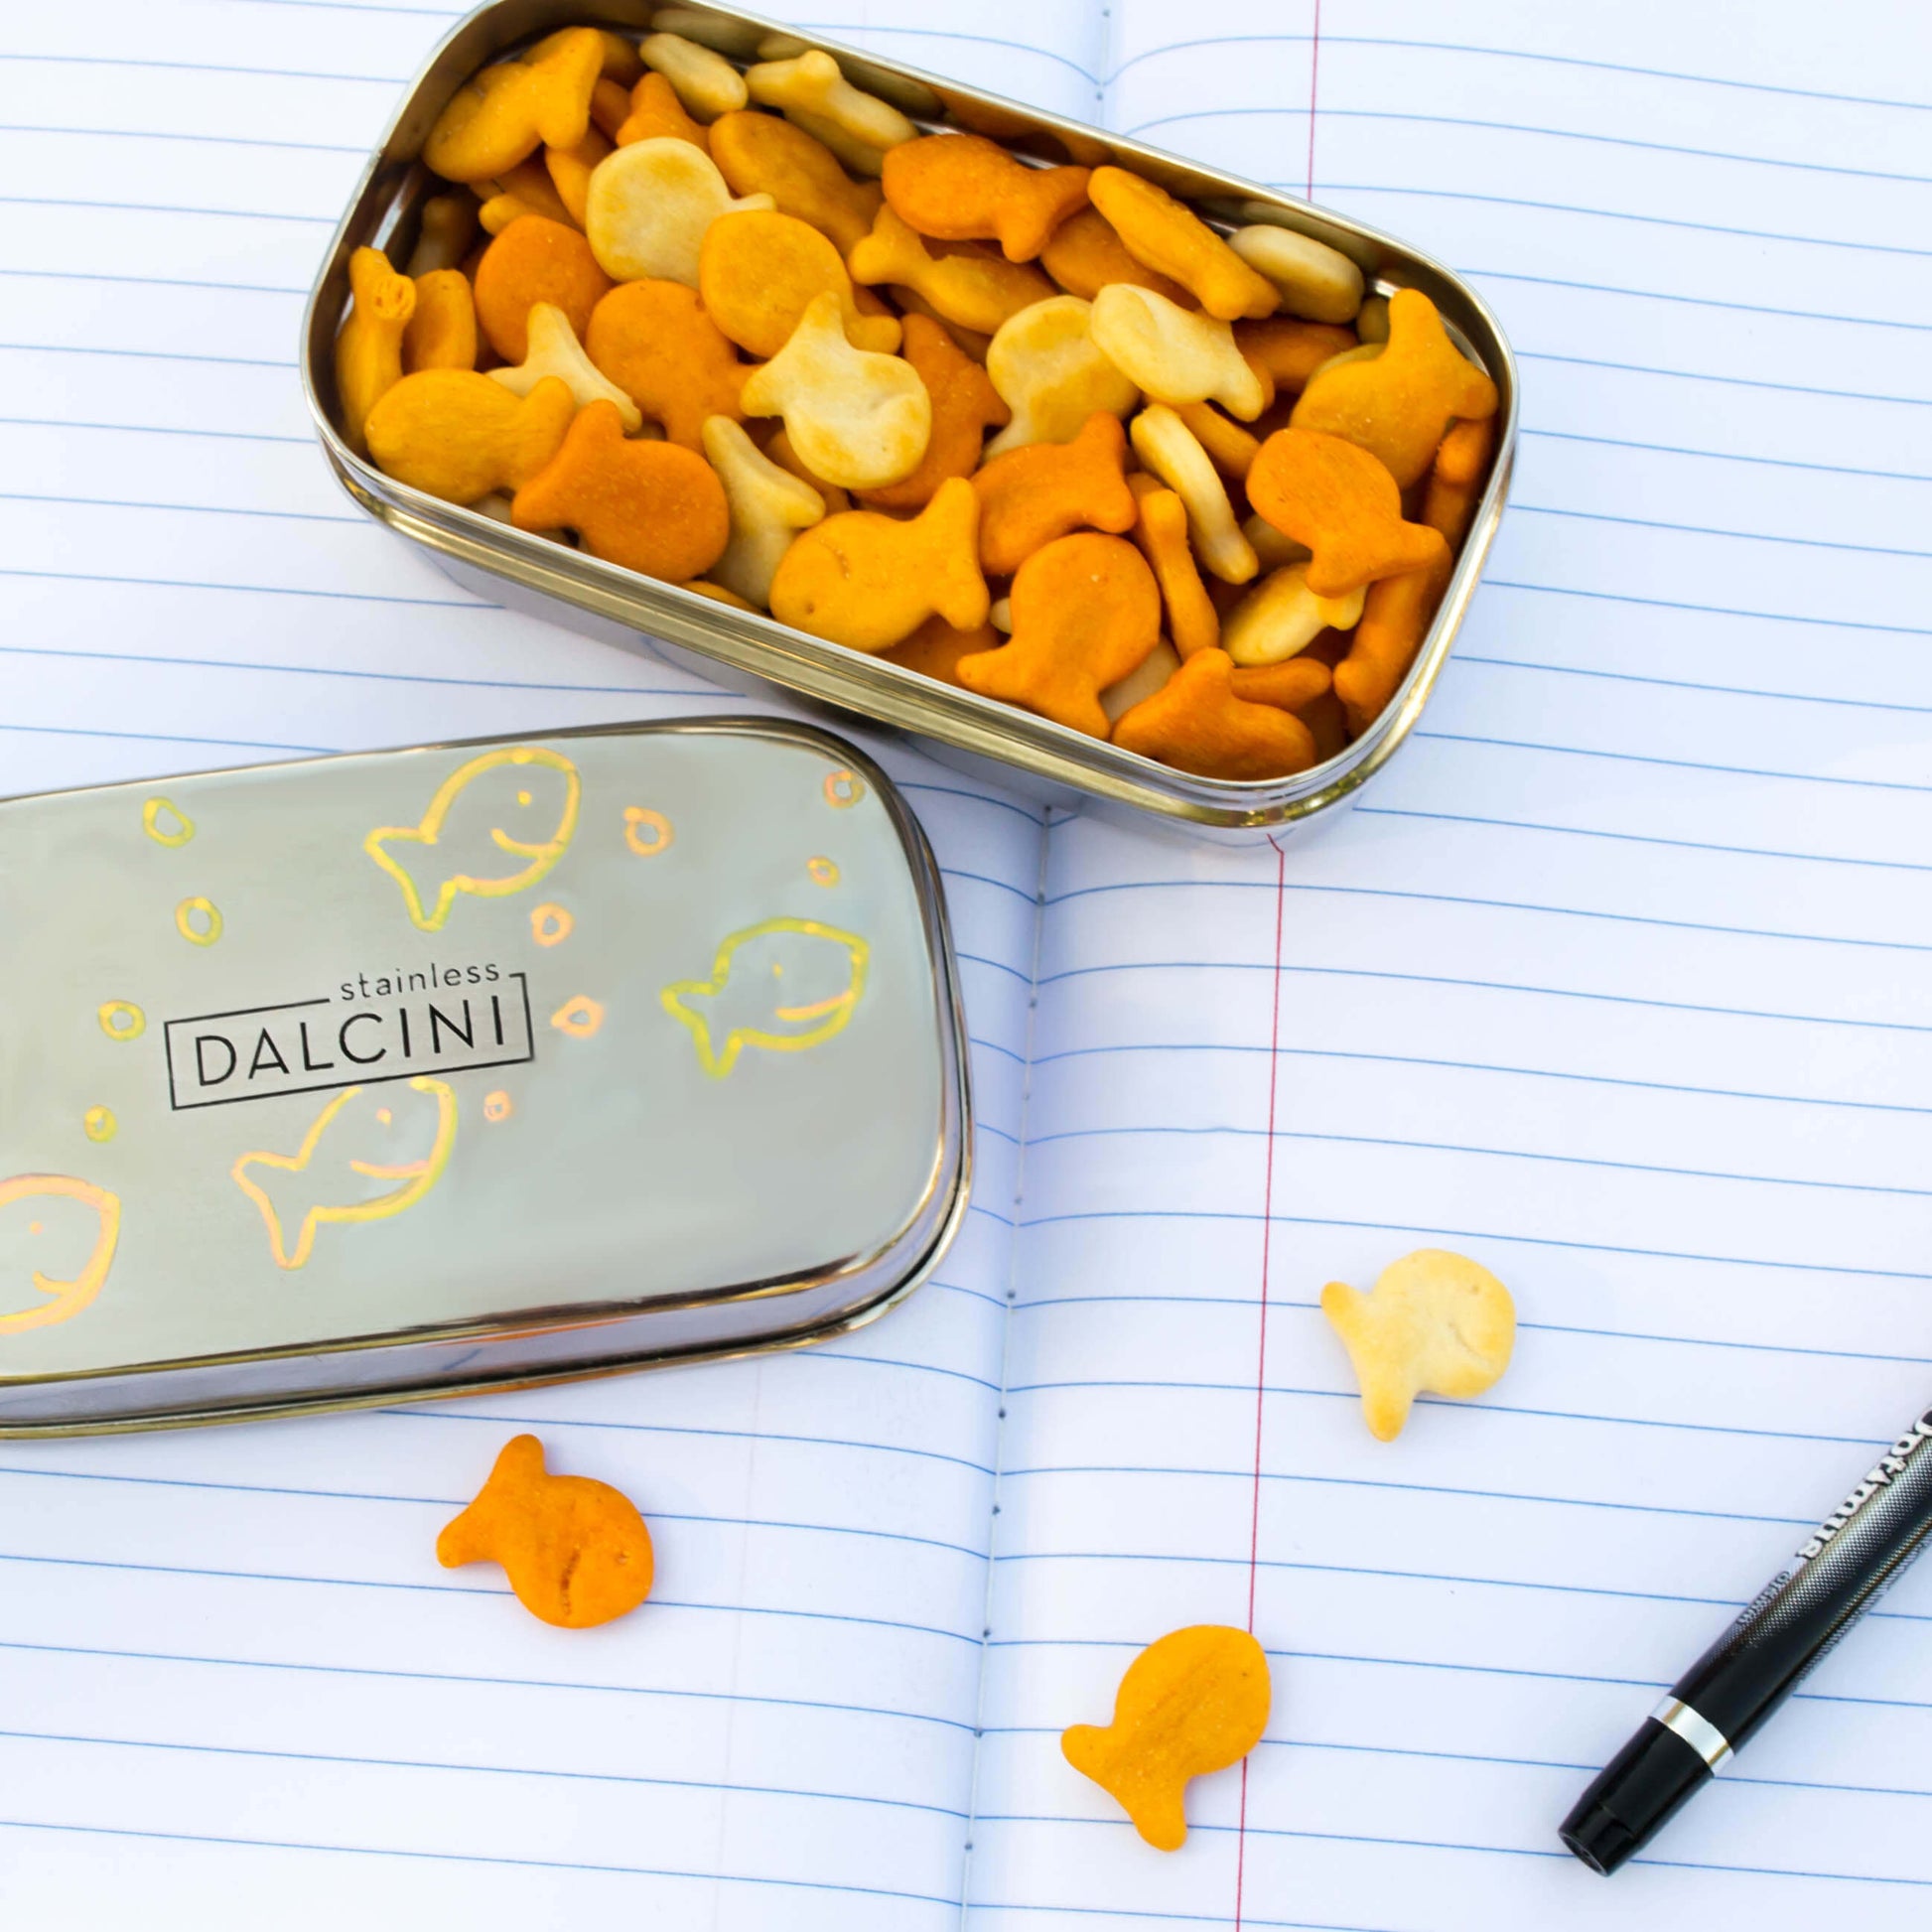 Goldfish crackers in stainless steel snack box on top of lined notebook